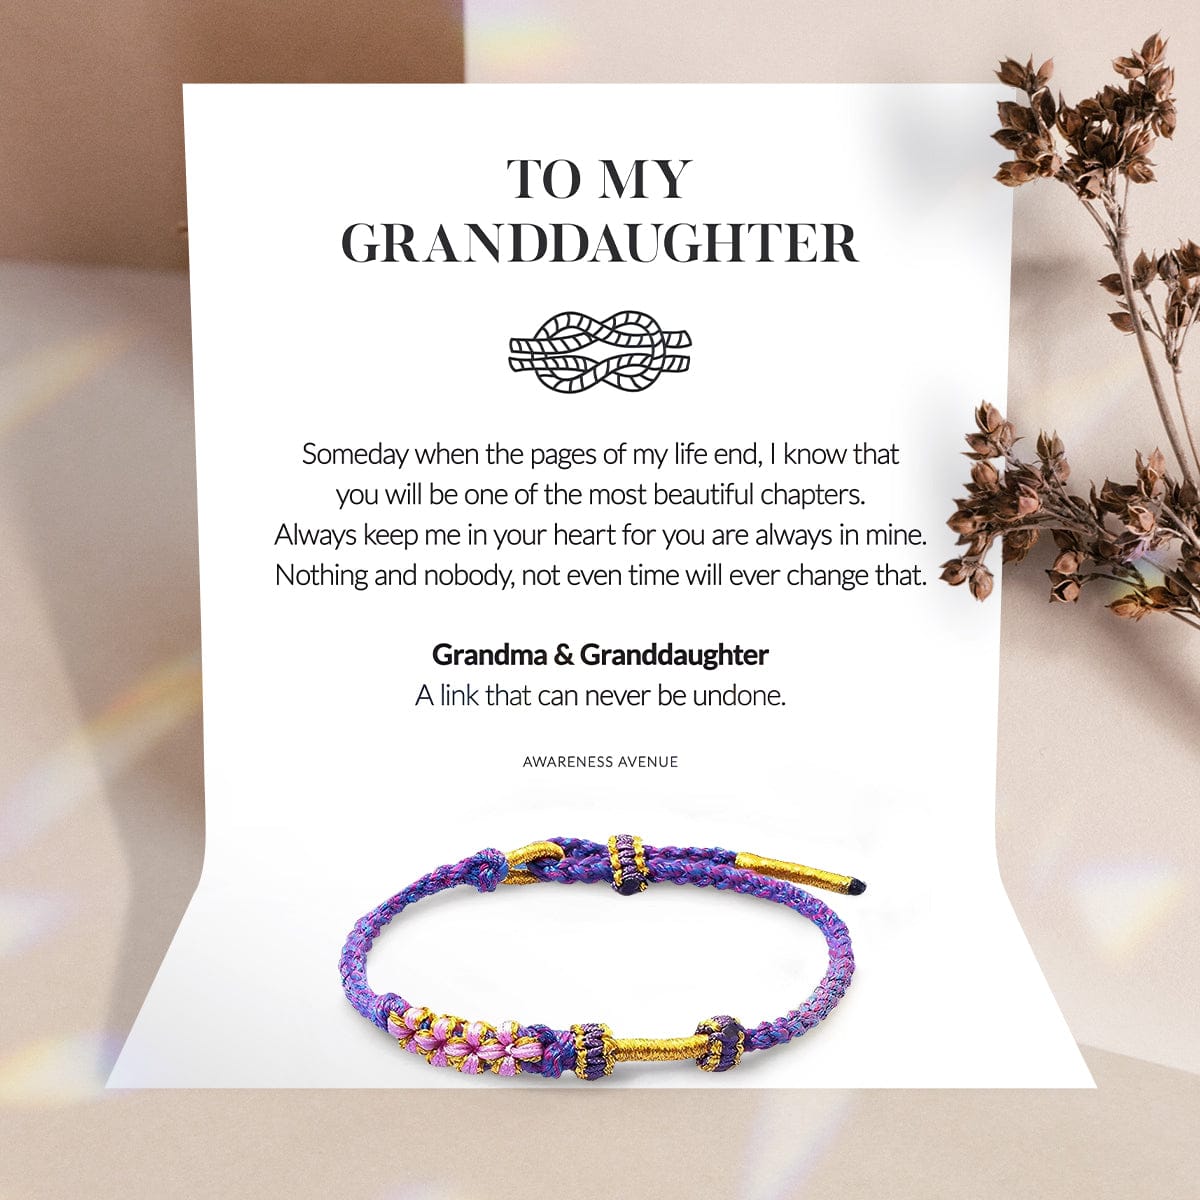 Granddaughter | A Link That Can Never Be Undone | Peach Blossom Knot Bracelet